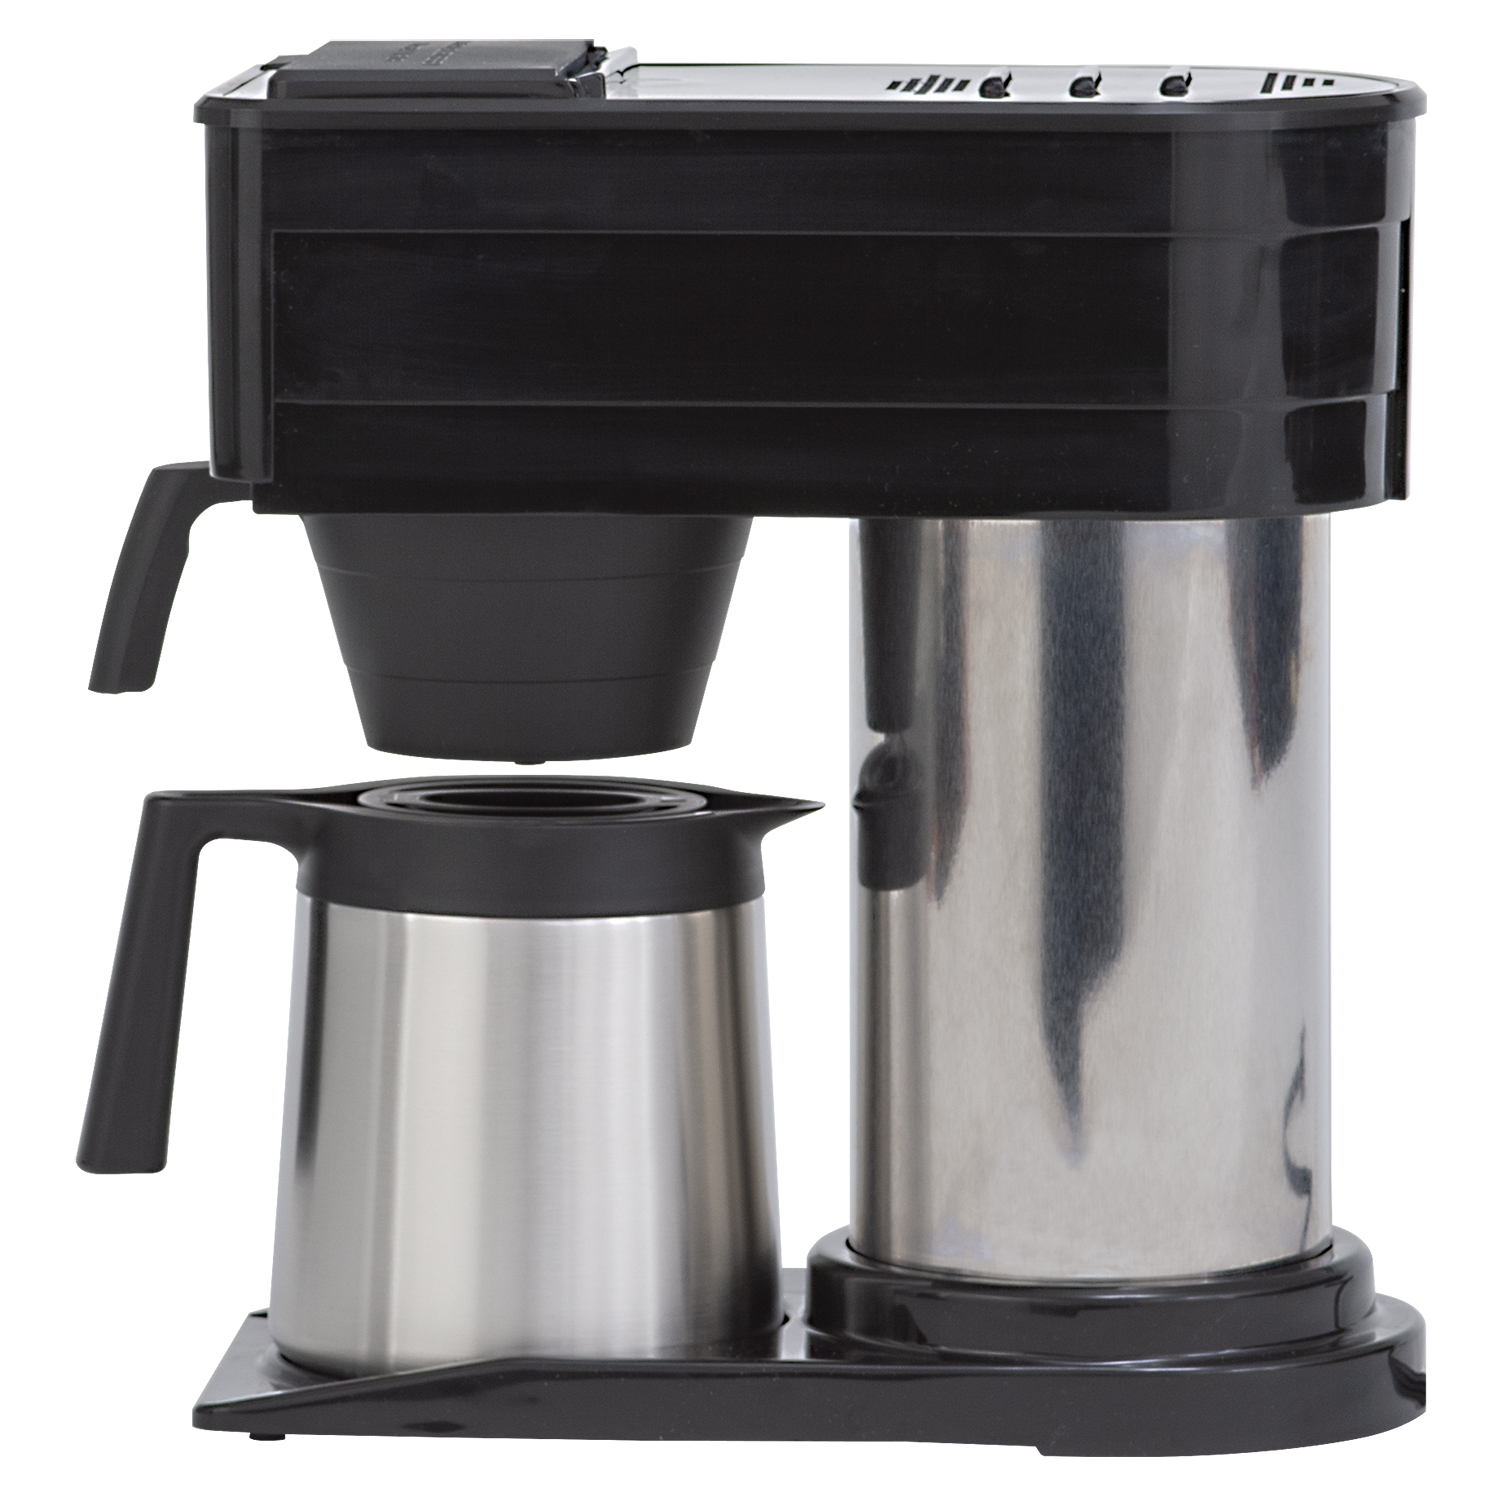 BUNN, BTX 10 Cup Black Thermal Coffee Maker (Condition: New) - image 2 of 5